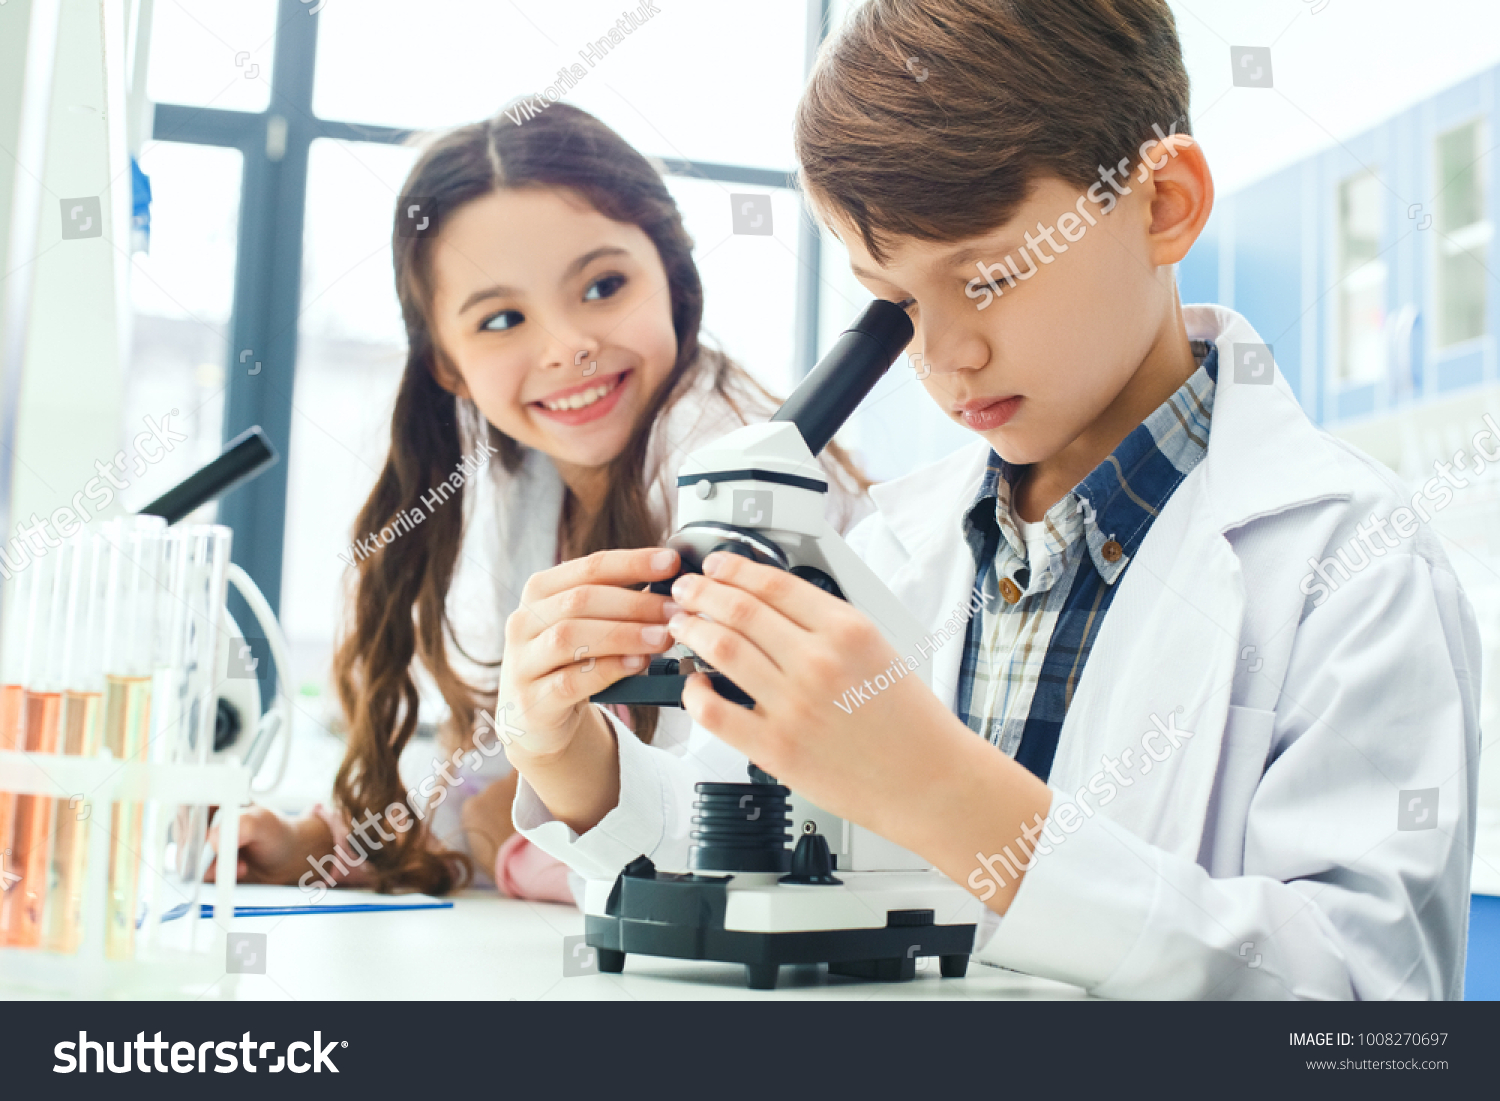 Little kids learning chemistry in school laboratory microscope experiment notes #1008270697